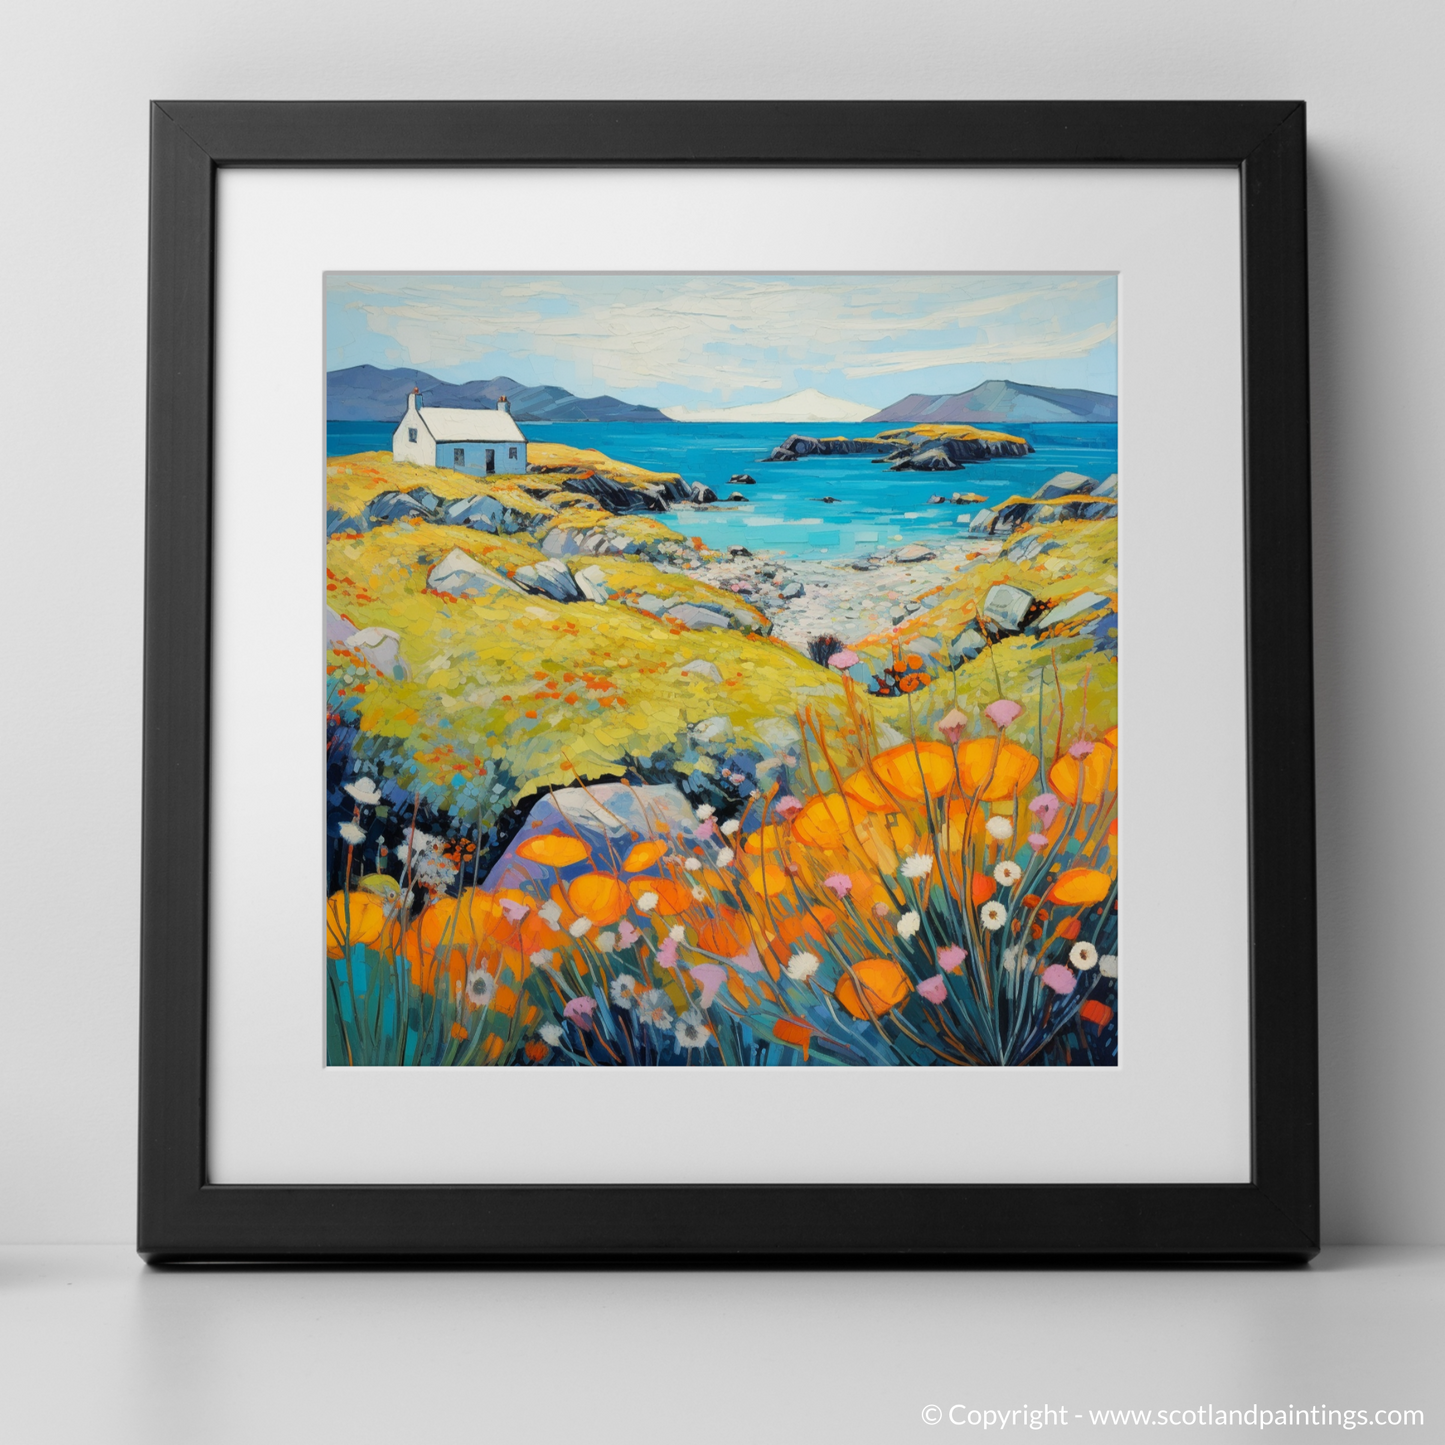 Art Print of Isle of Scalpay, Outer Hebrides in summer with a black frame